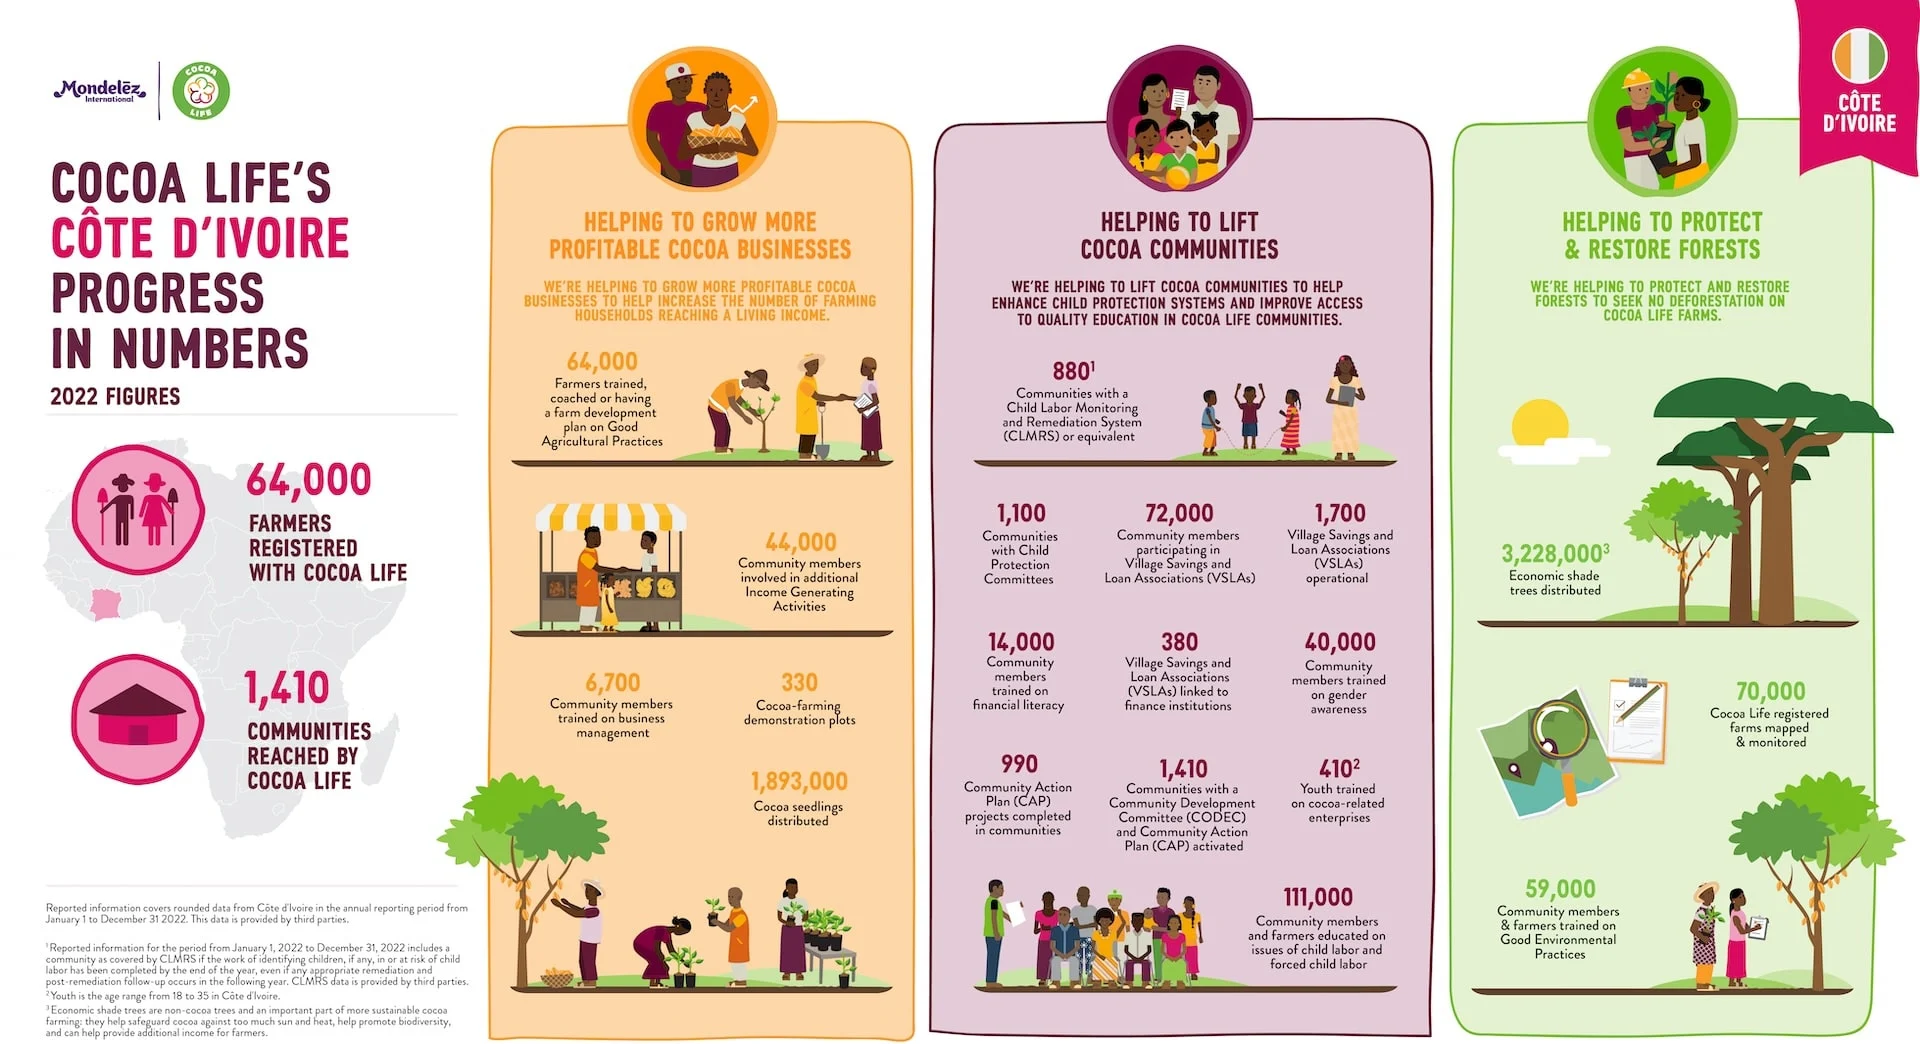 Cocoa Life Progress Dashboard Infographic  - Cote d'Ivoire 2022